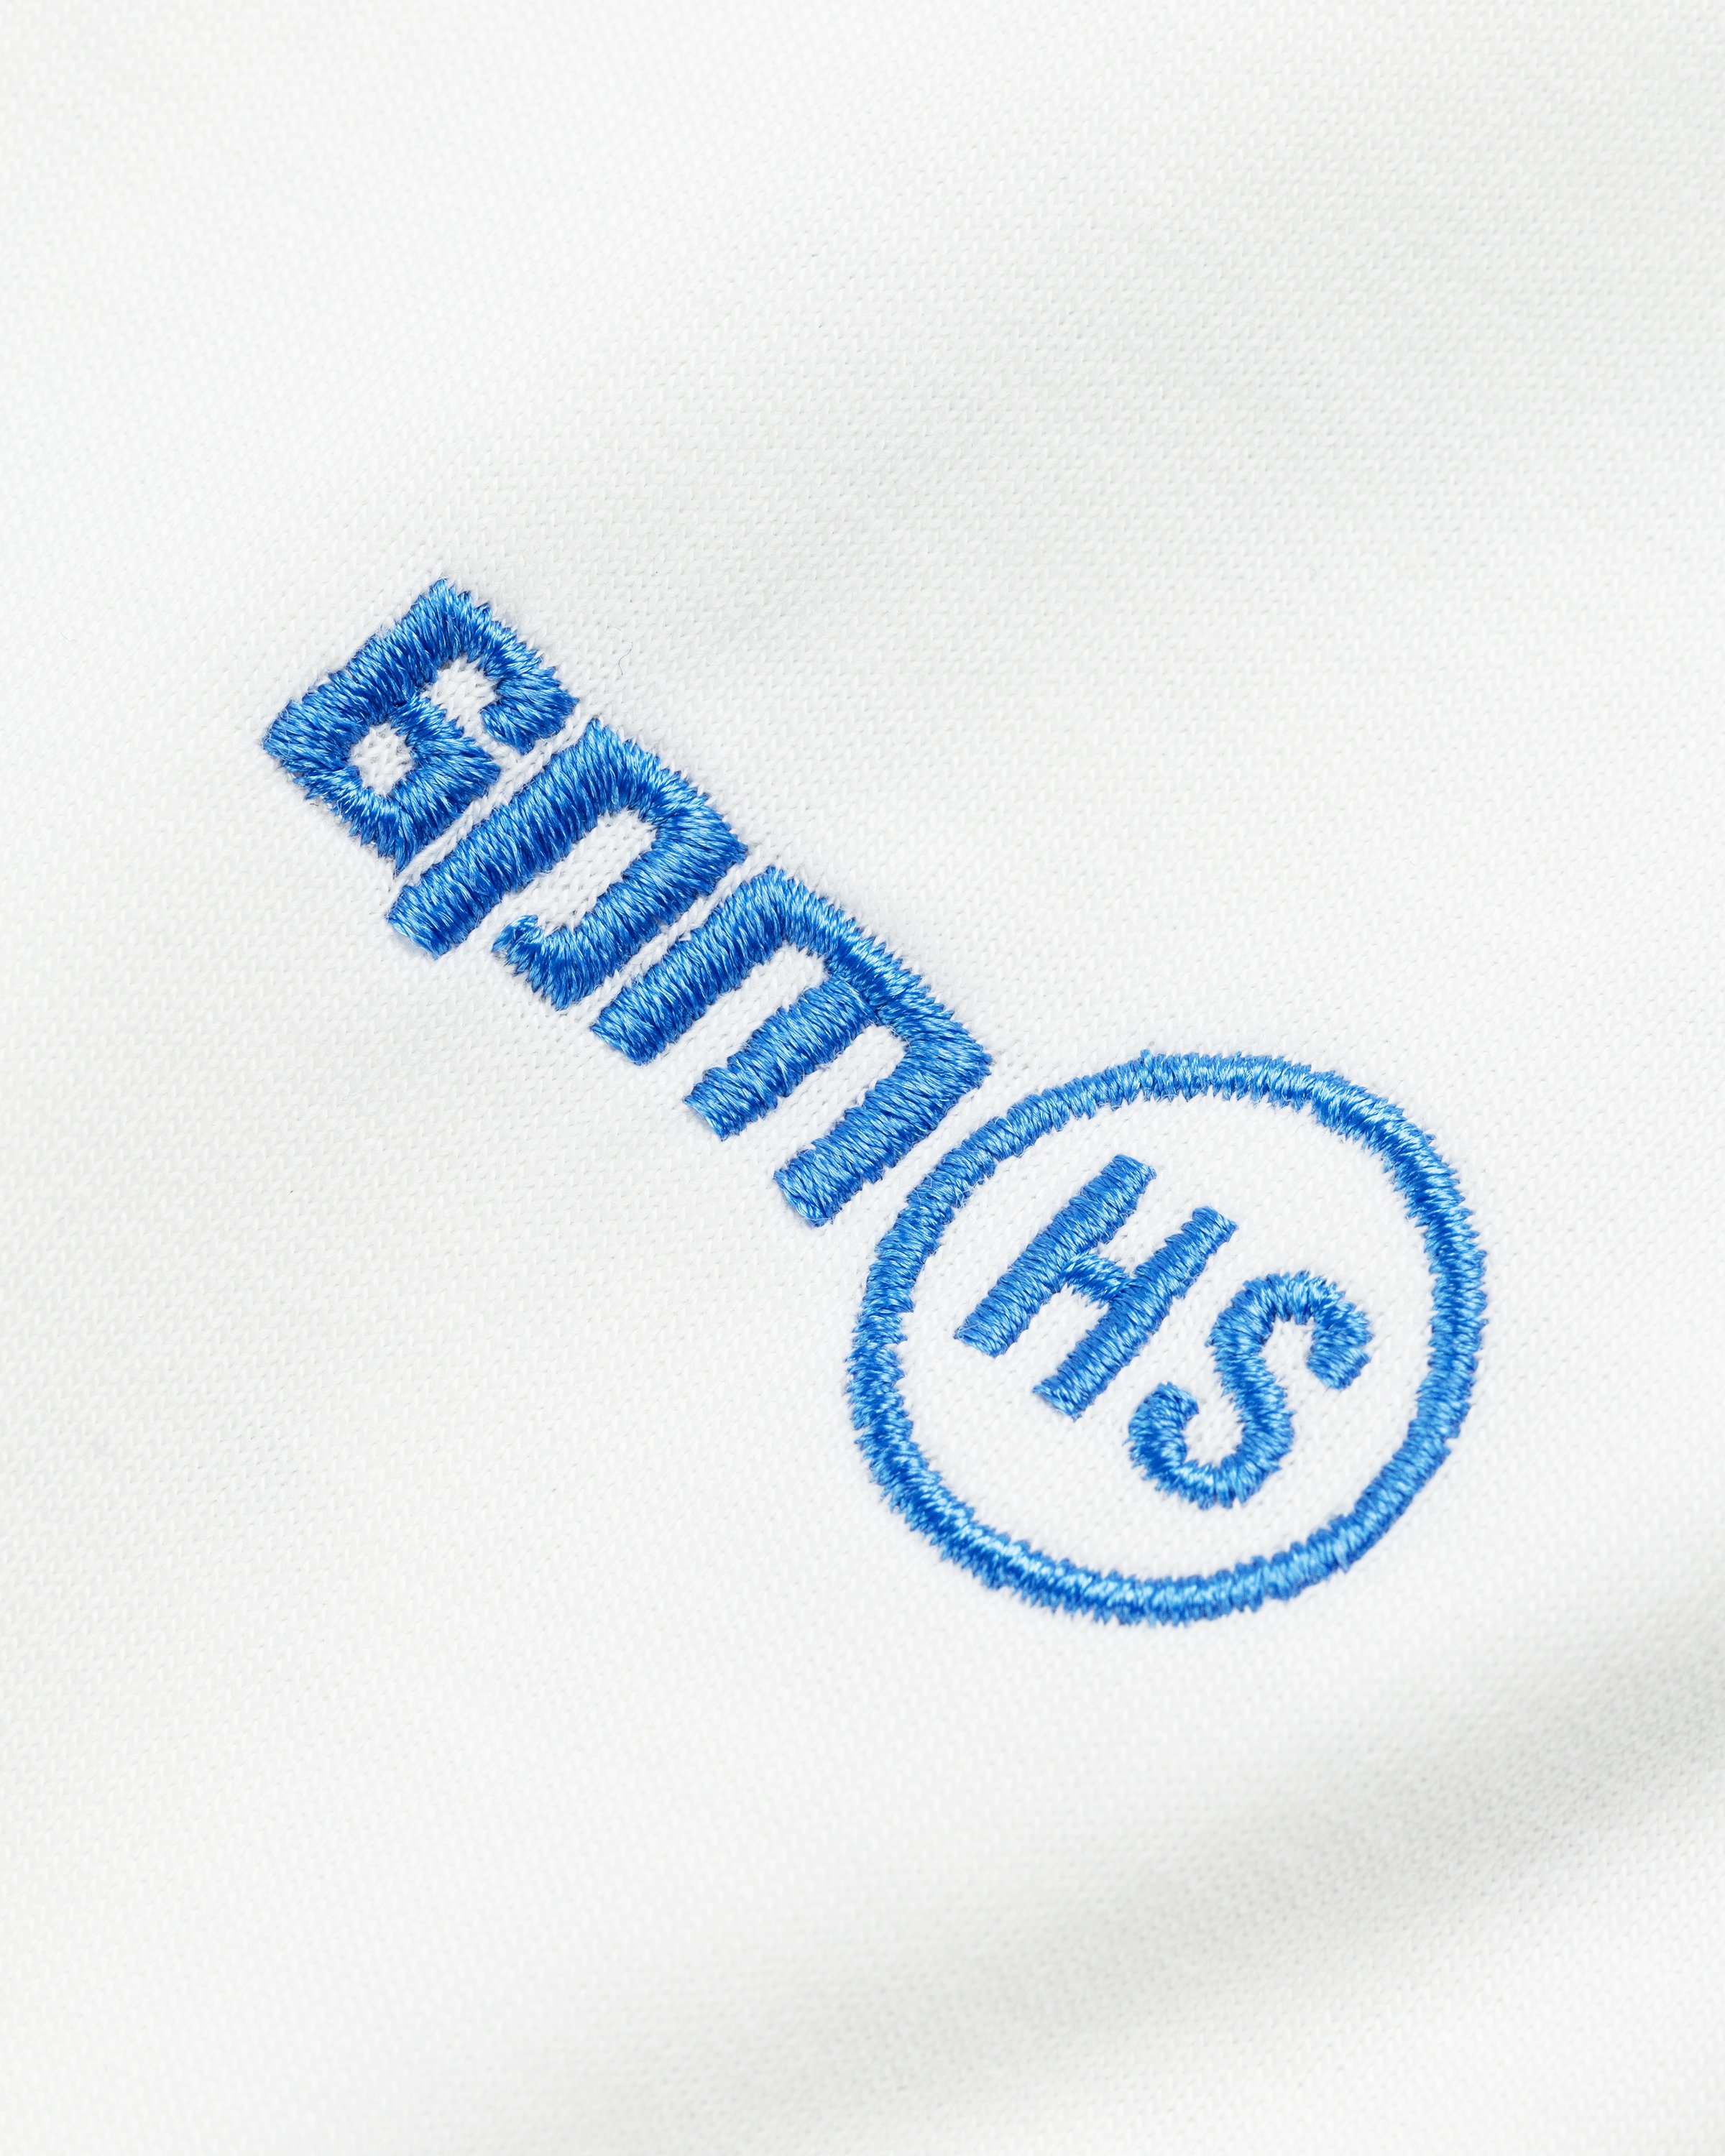 6PM x Highsnobiety - BERLIN, BERLIN 3 Only Wear After 6PM T-Shirt White - Clothing - White - Image 5